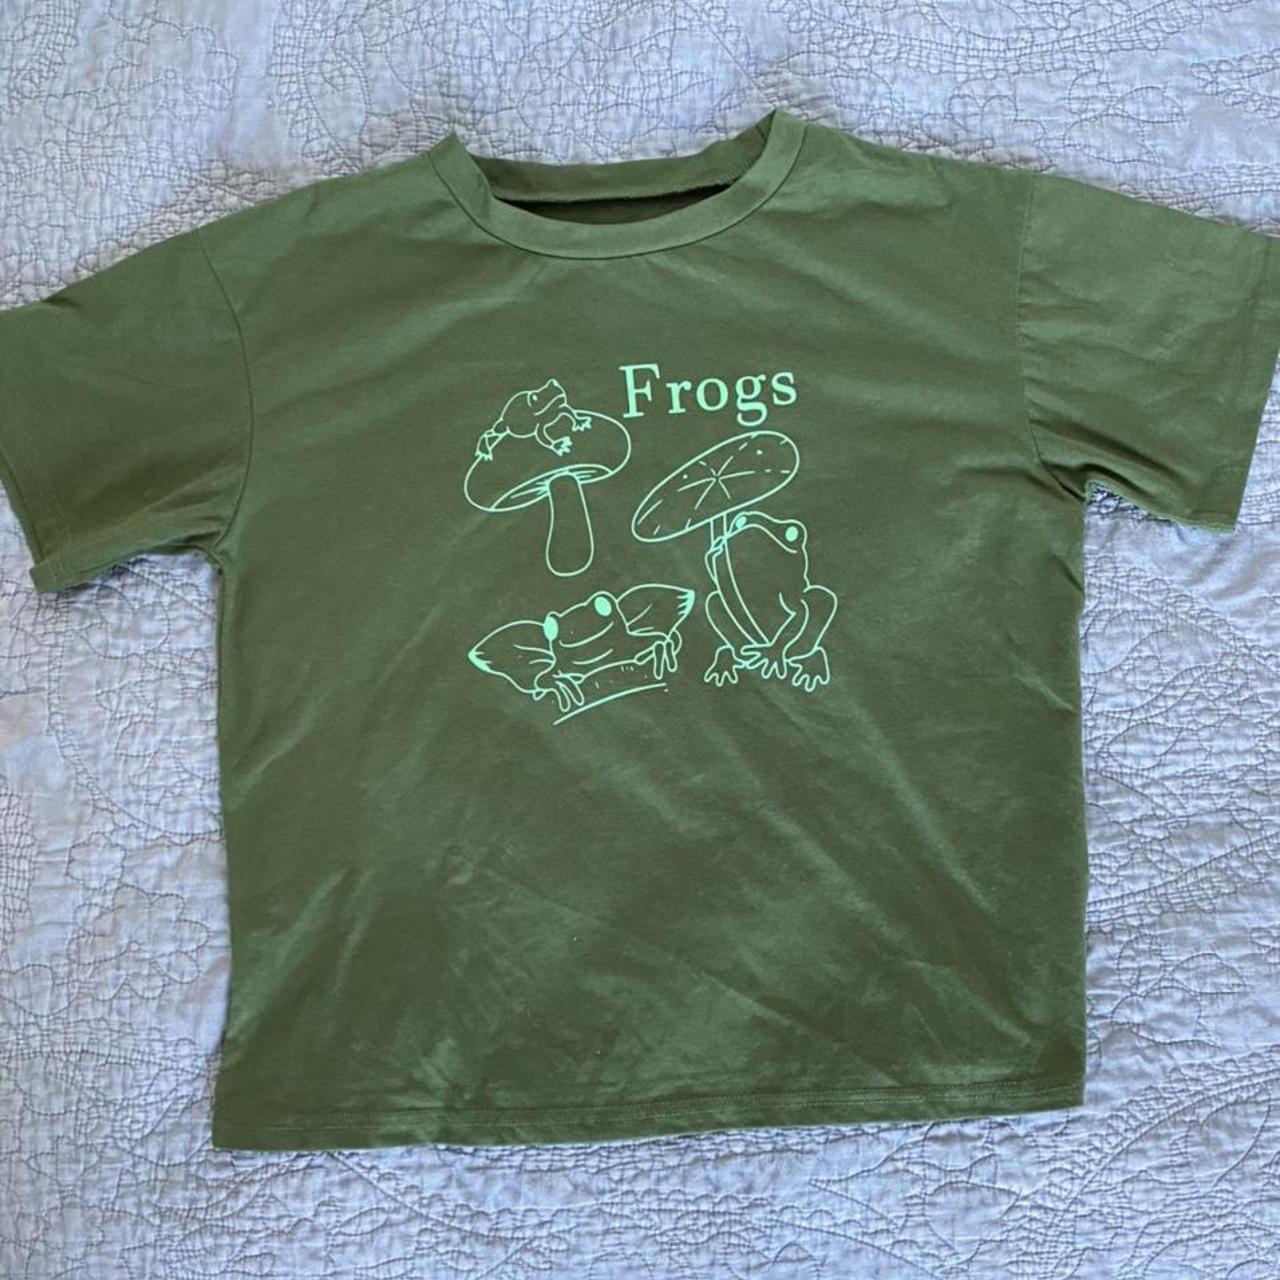 Froggy shirt 🐸 #frog #frogshirt #ilovefrogs #froggy... - Depop